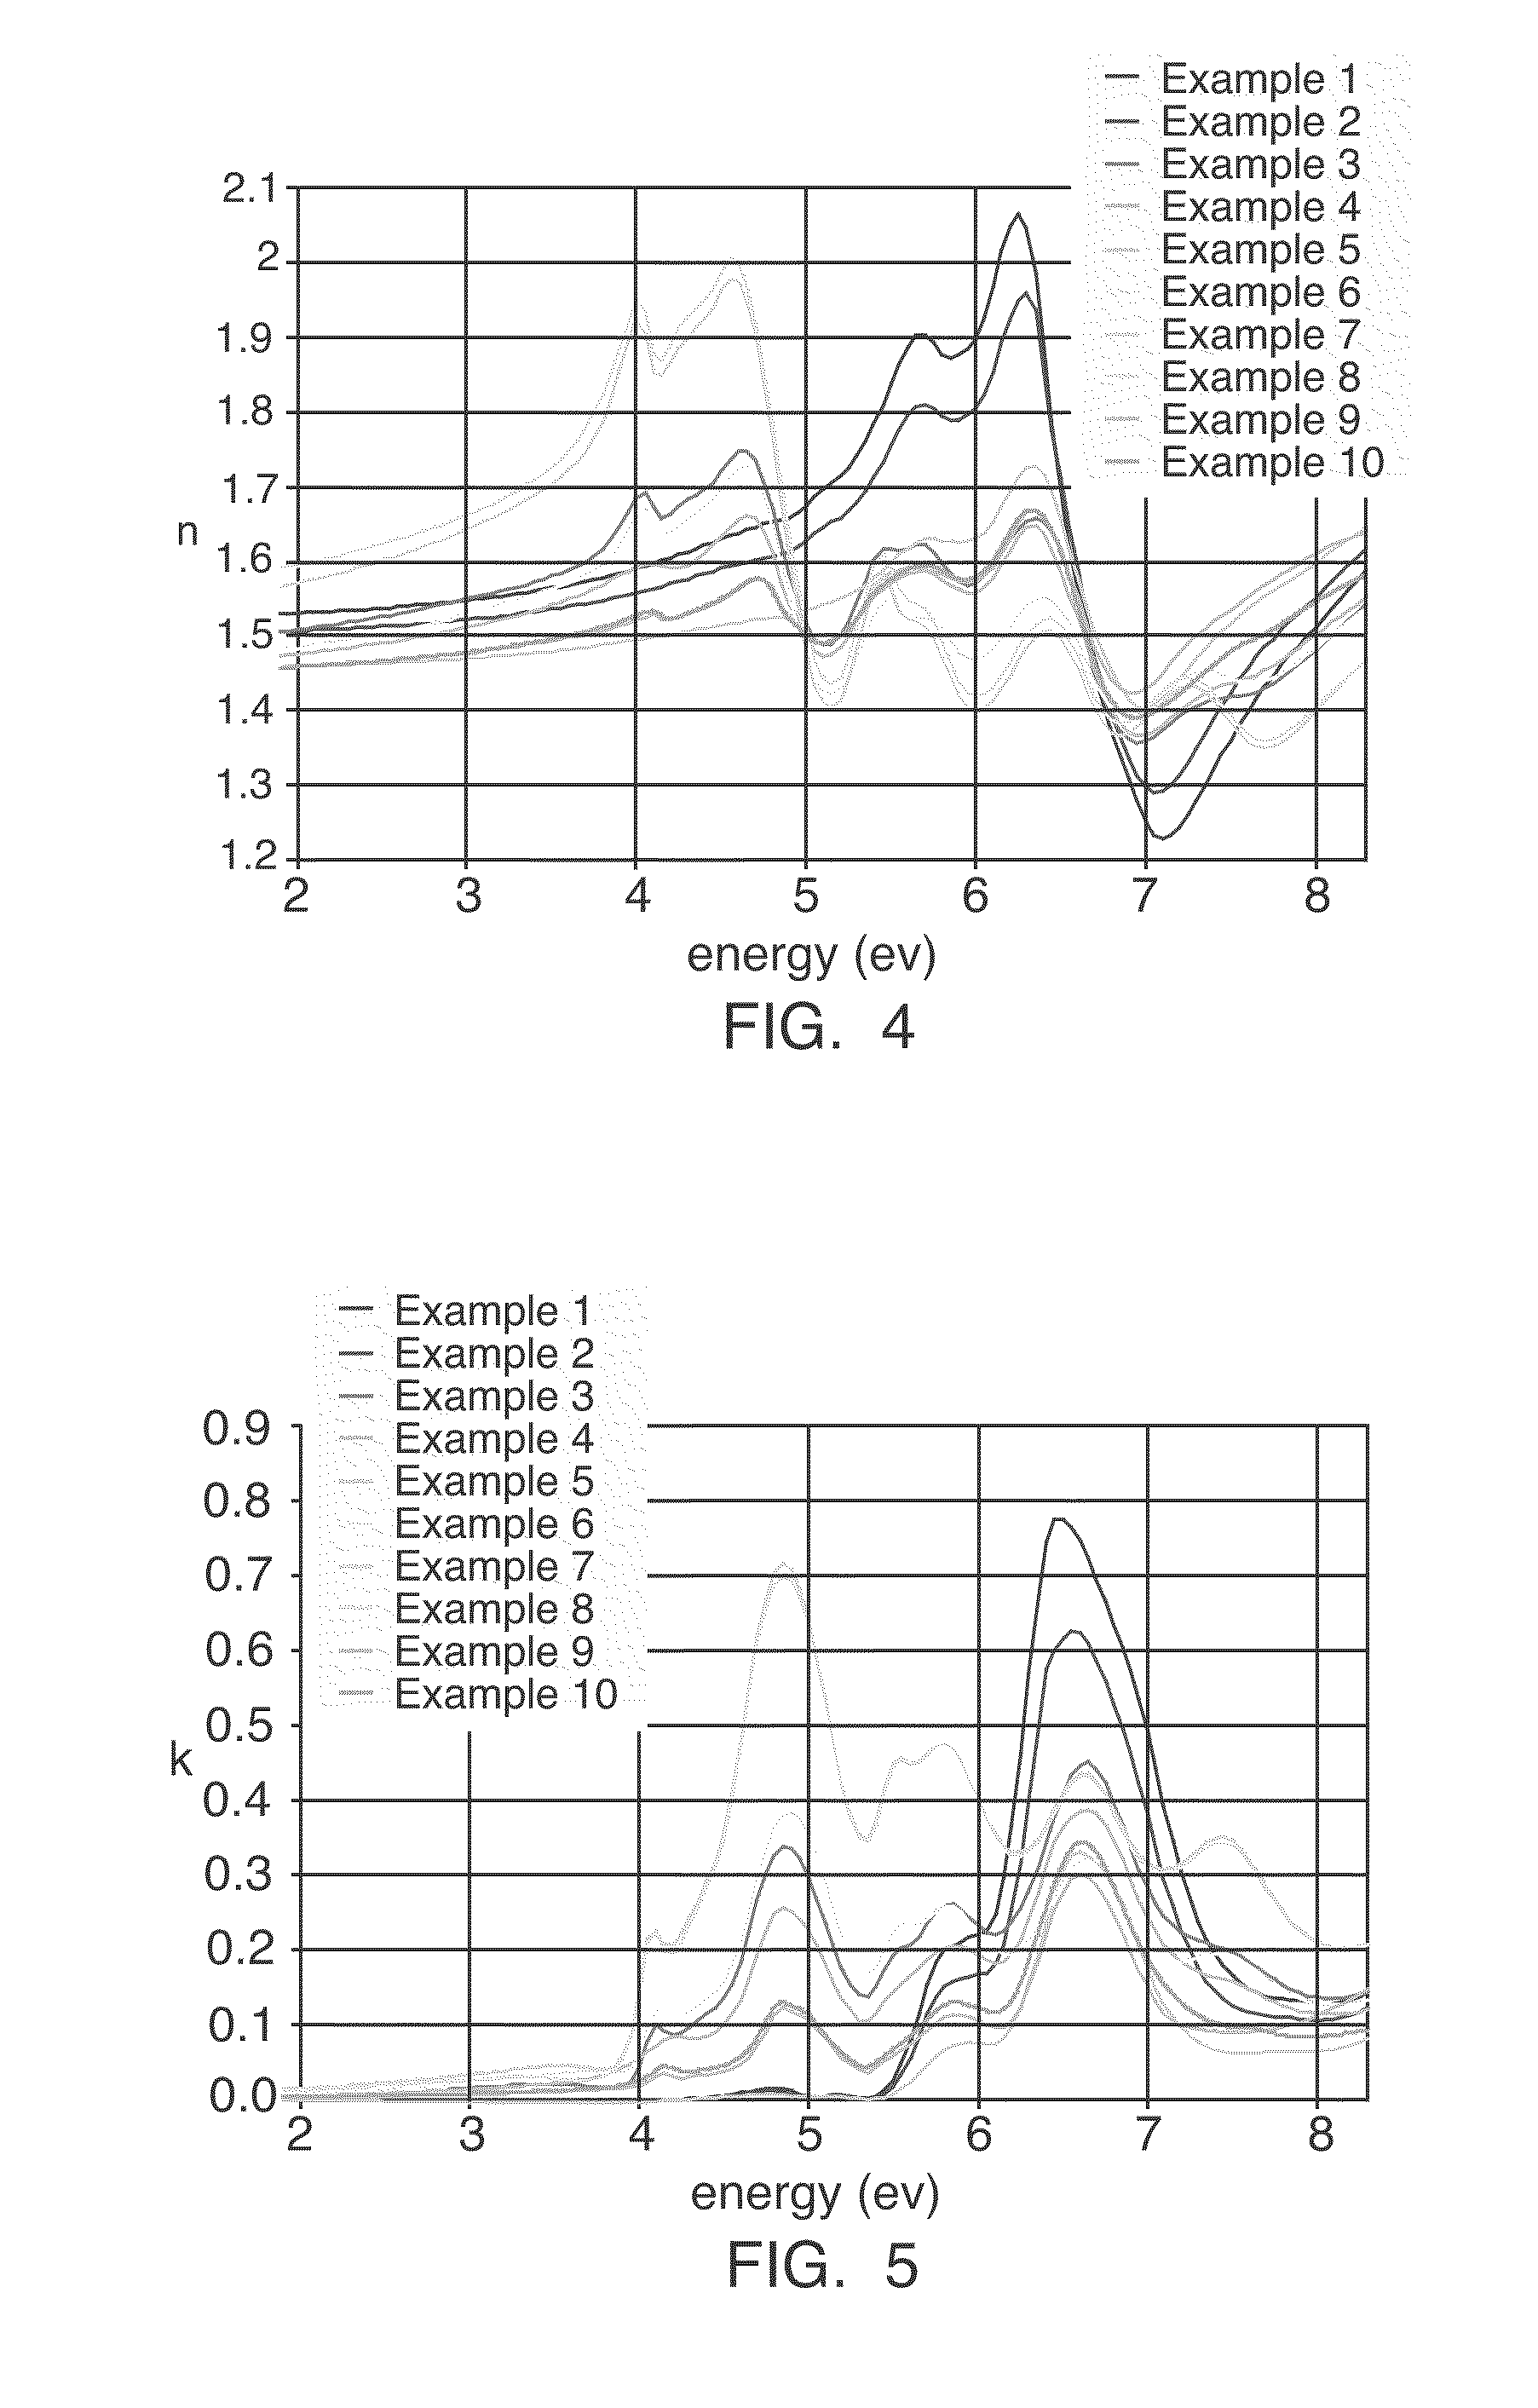 Hybrid inorganic-organic polymer compositions for Anti-reflective coatings